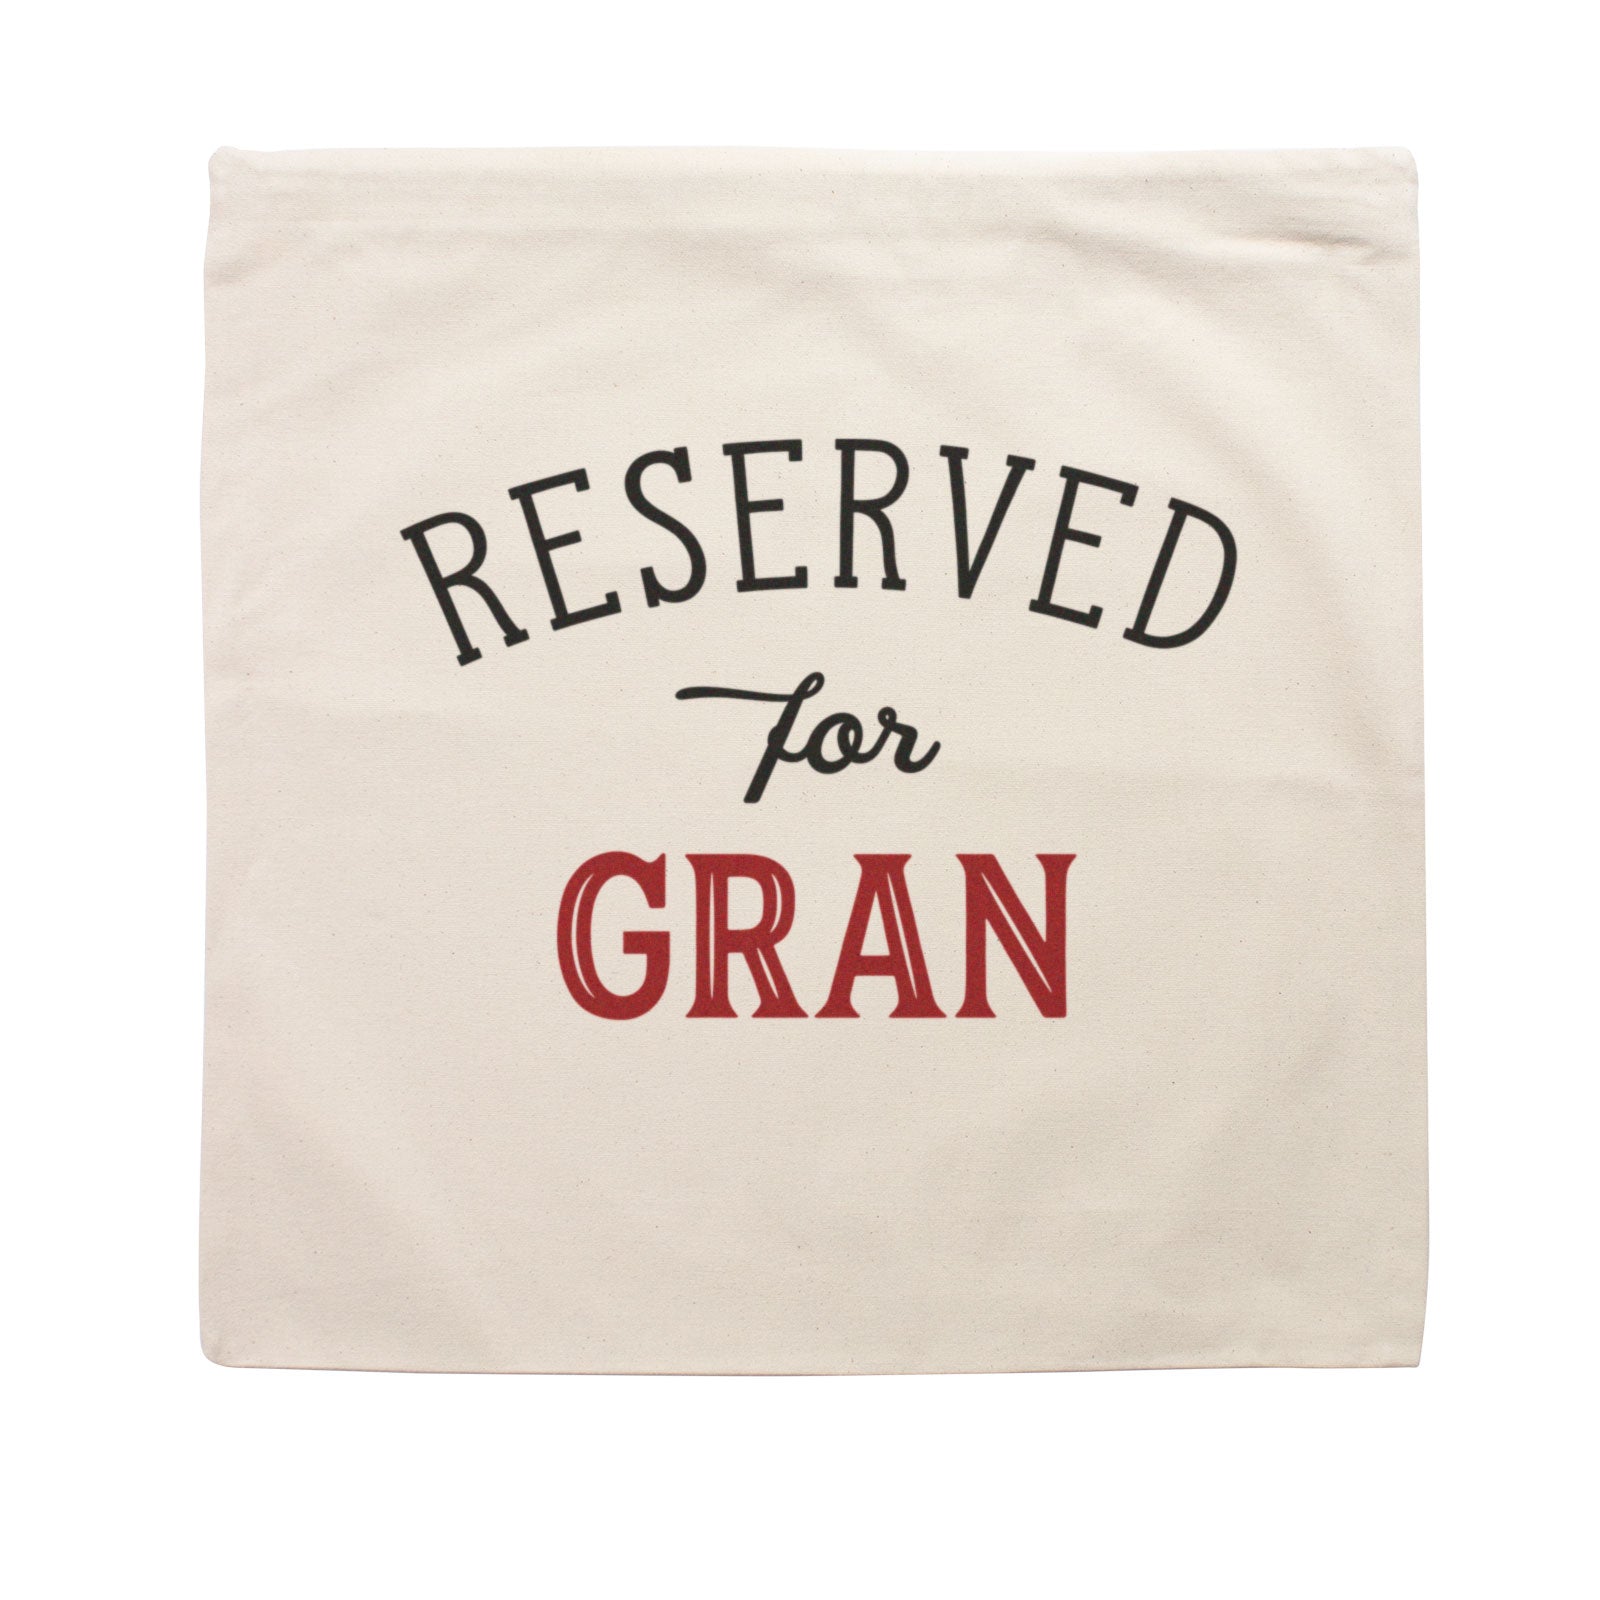 Reserved for Gran Cushion Cover